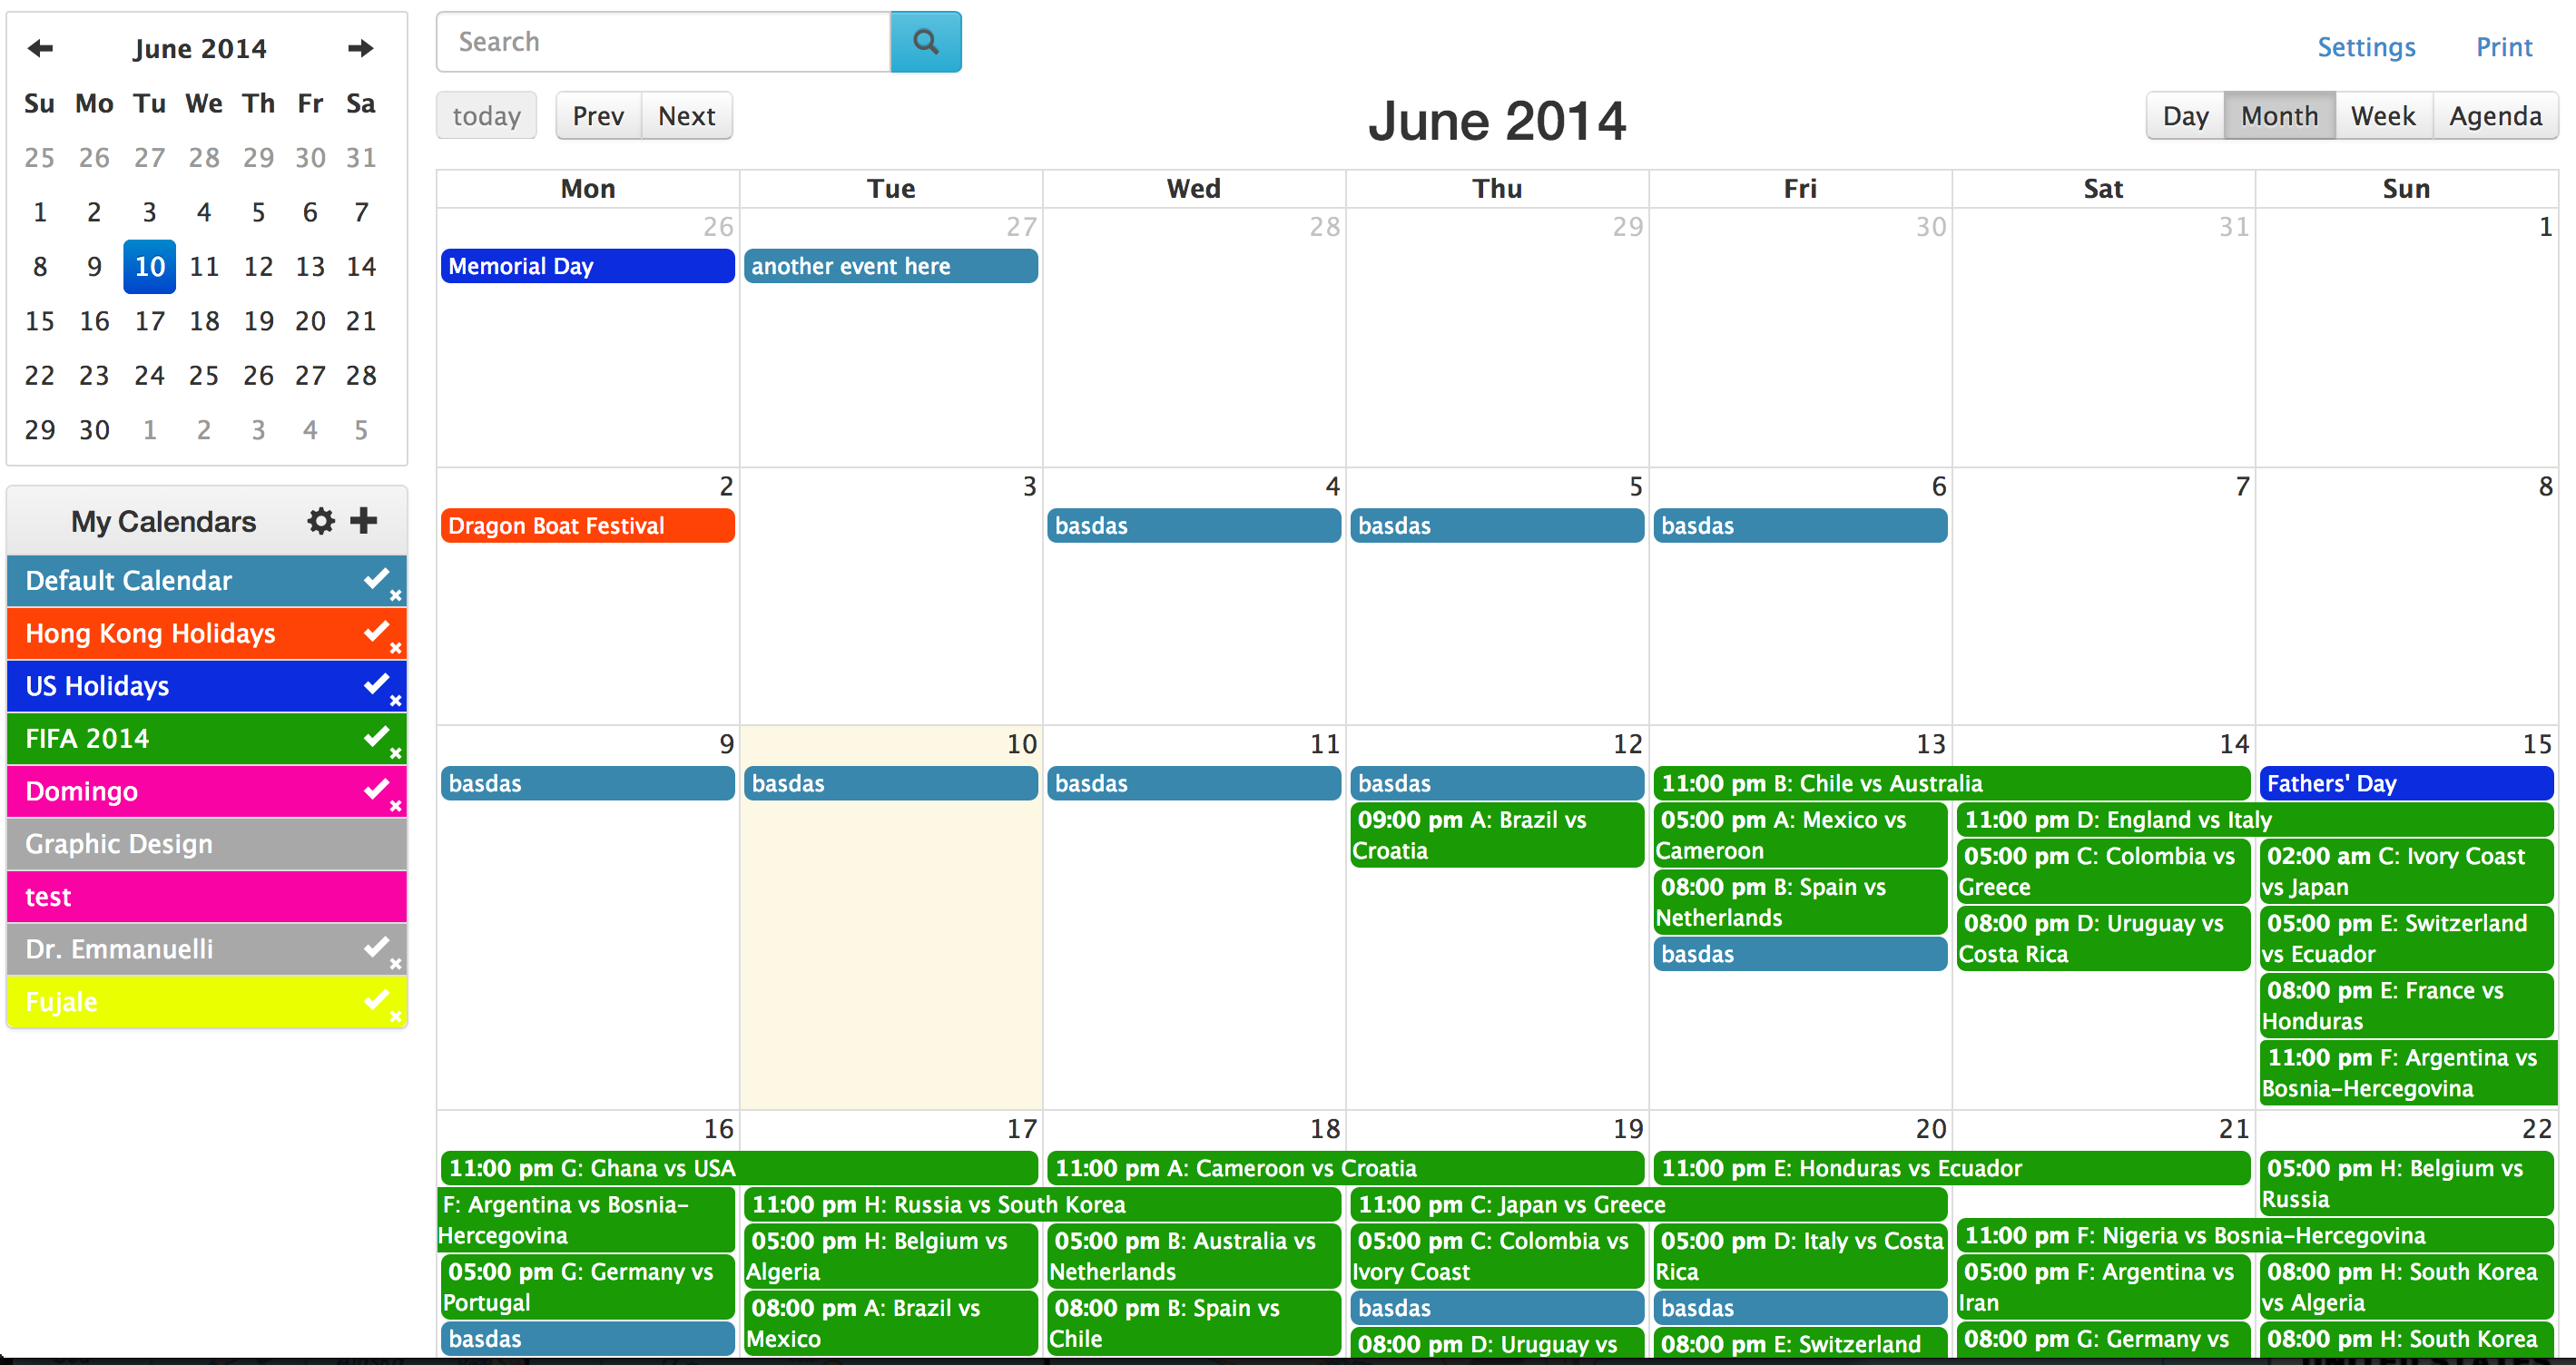 Php Event Calendar  Host Your Own Event Calendar In Minutes. pertaining to Php Calendar Event Scheduler Code